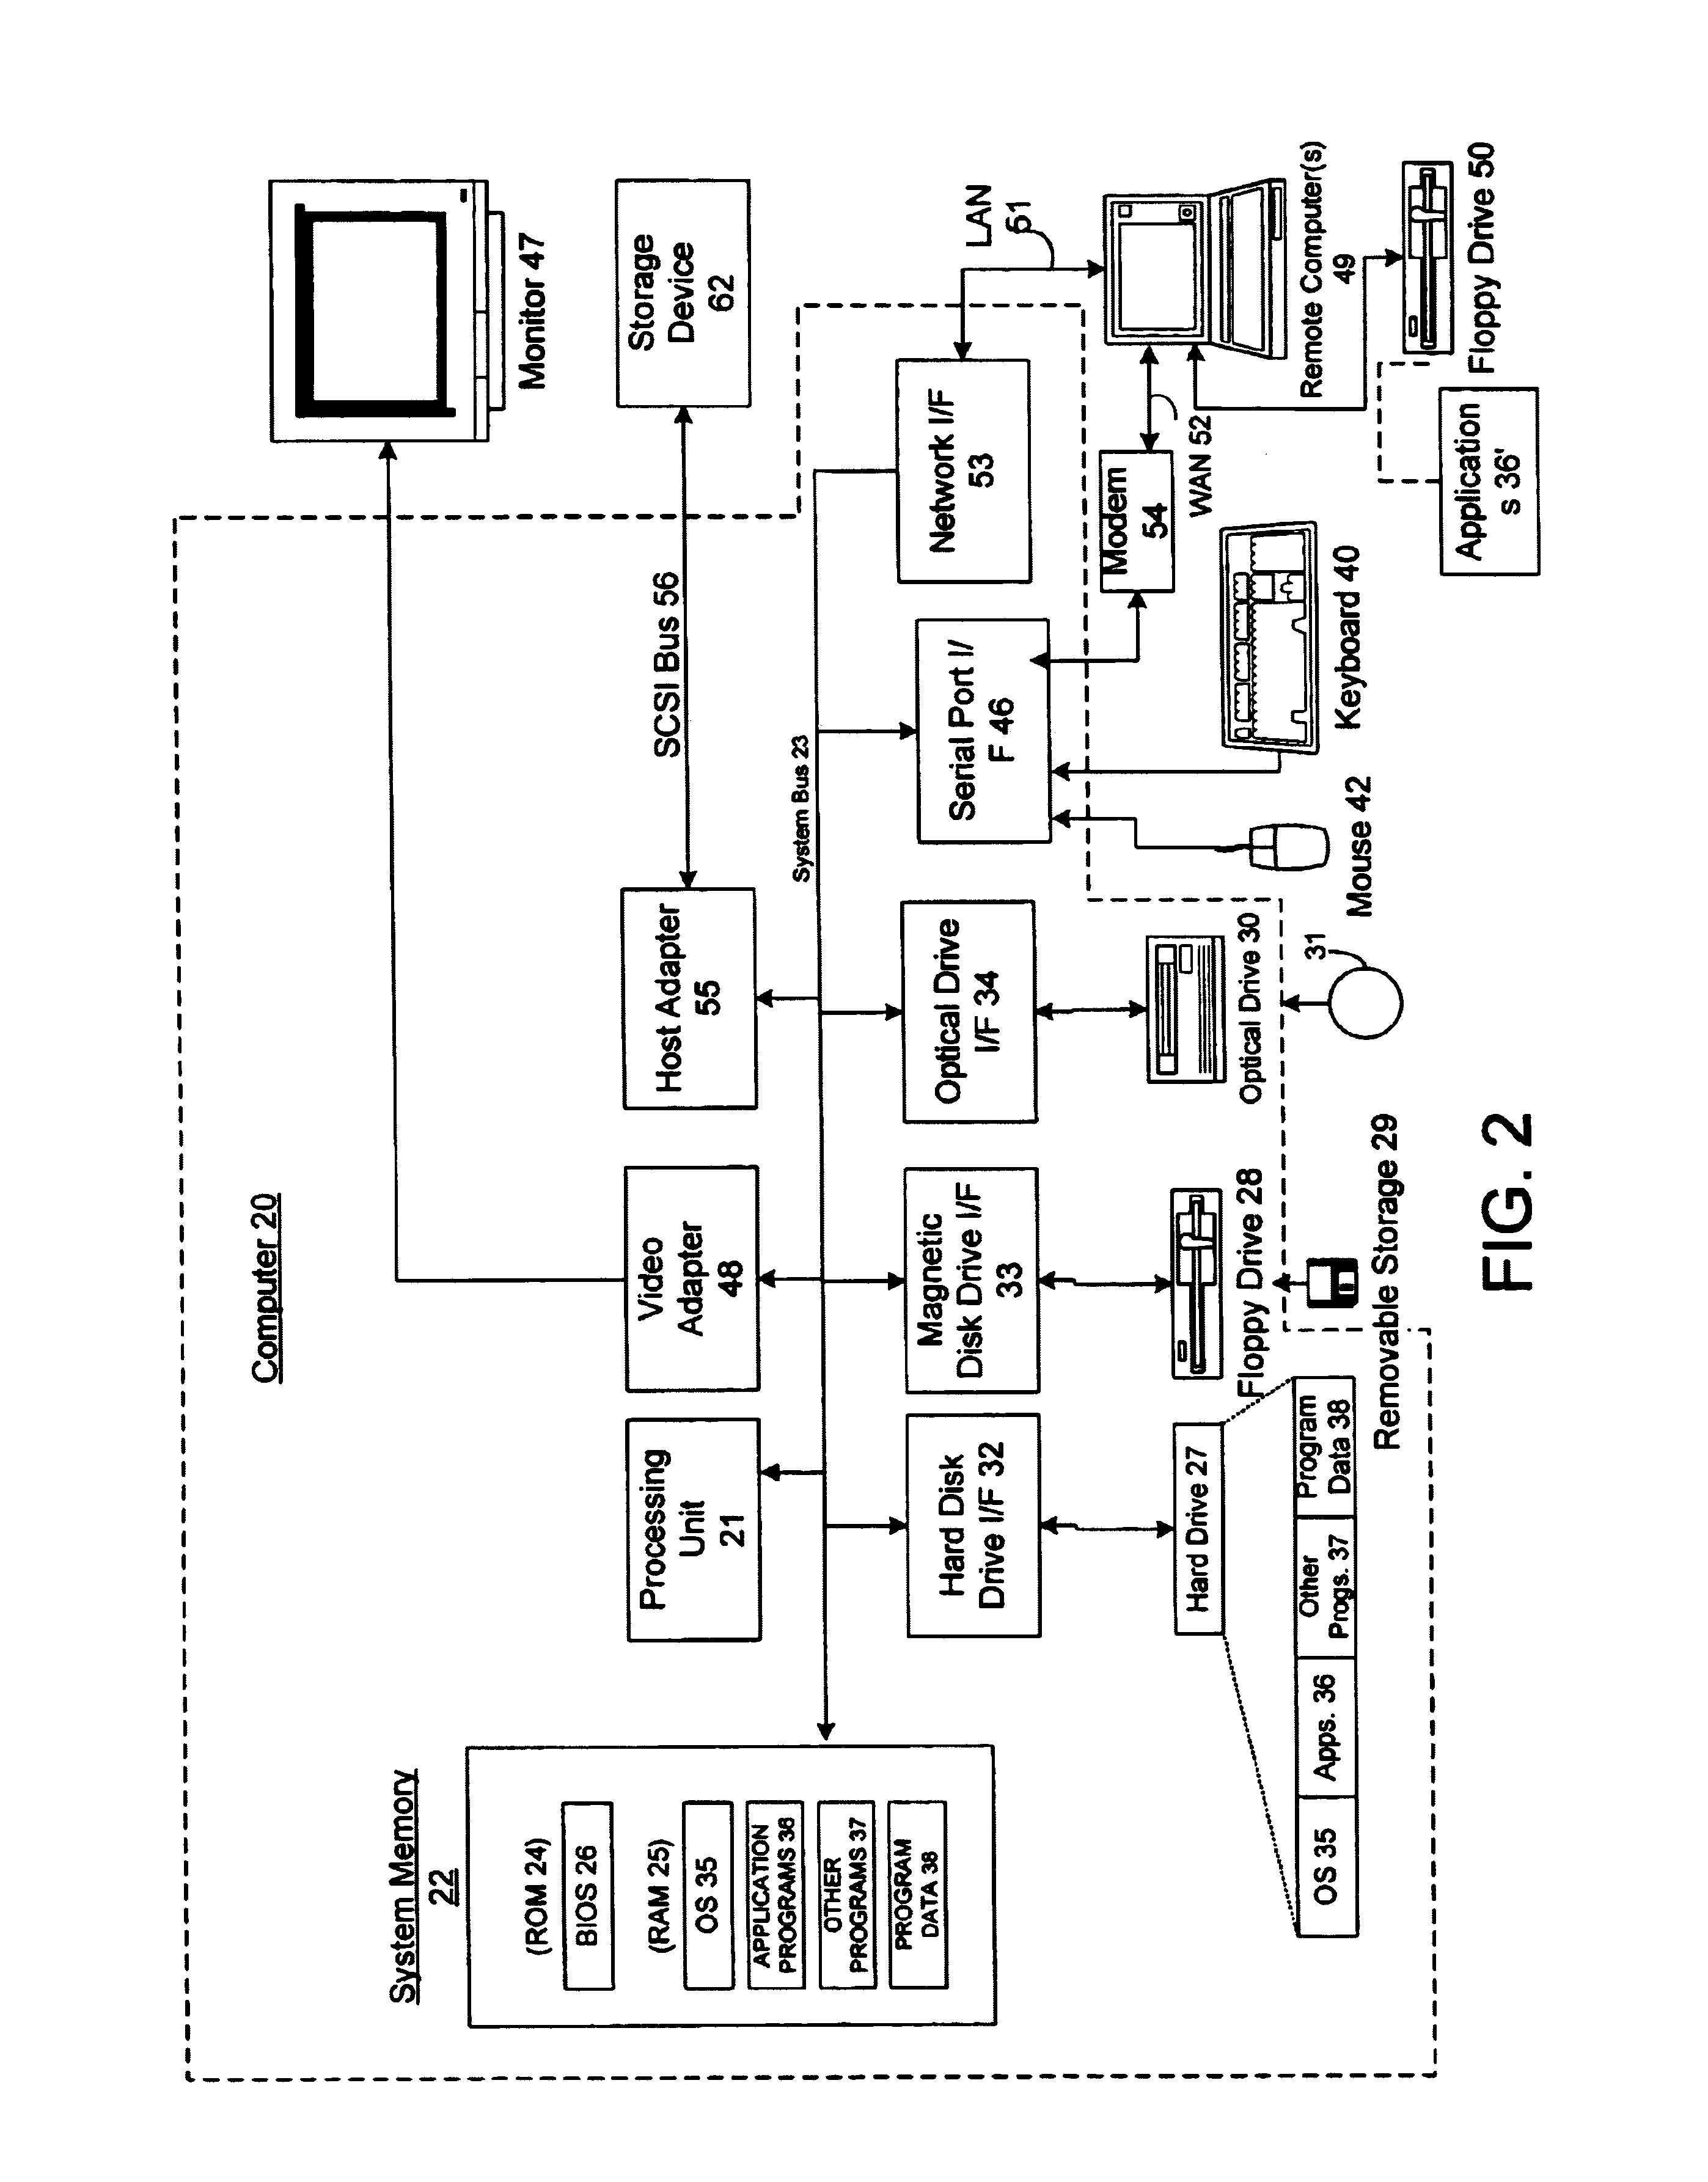 Server for an electronic distribution system and method of operating same